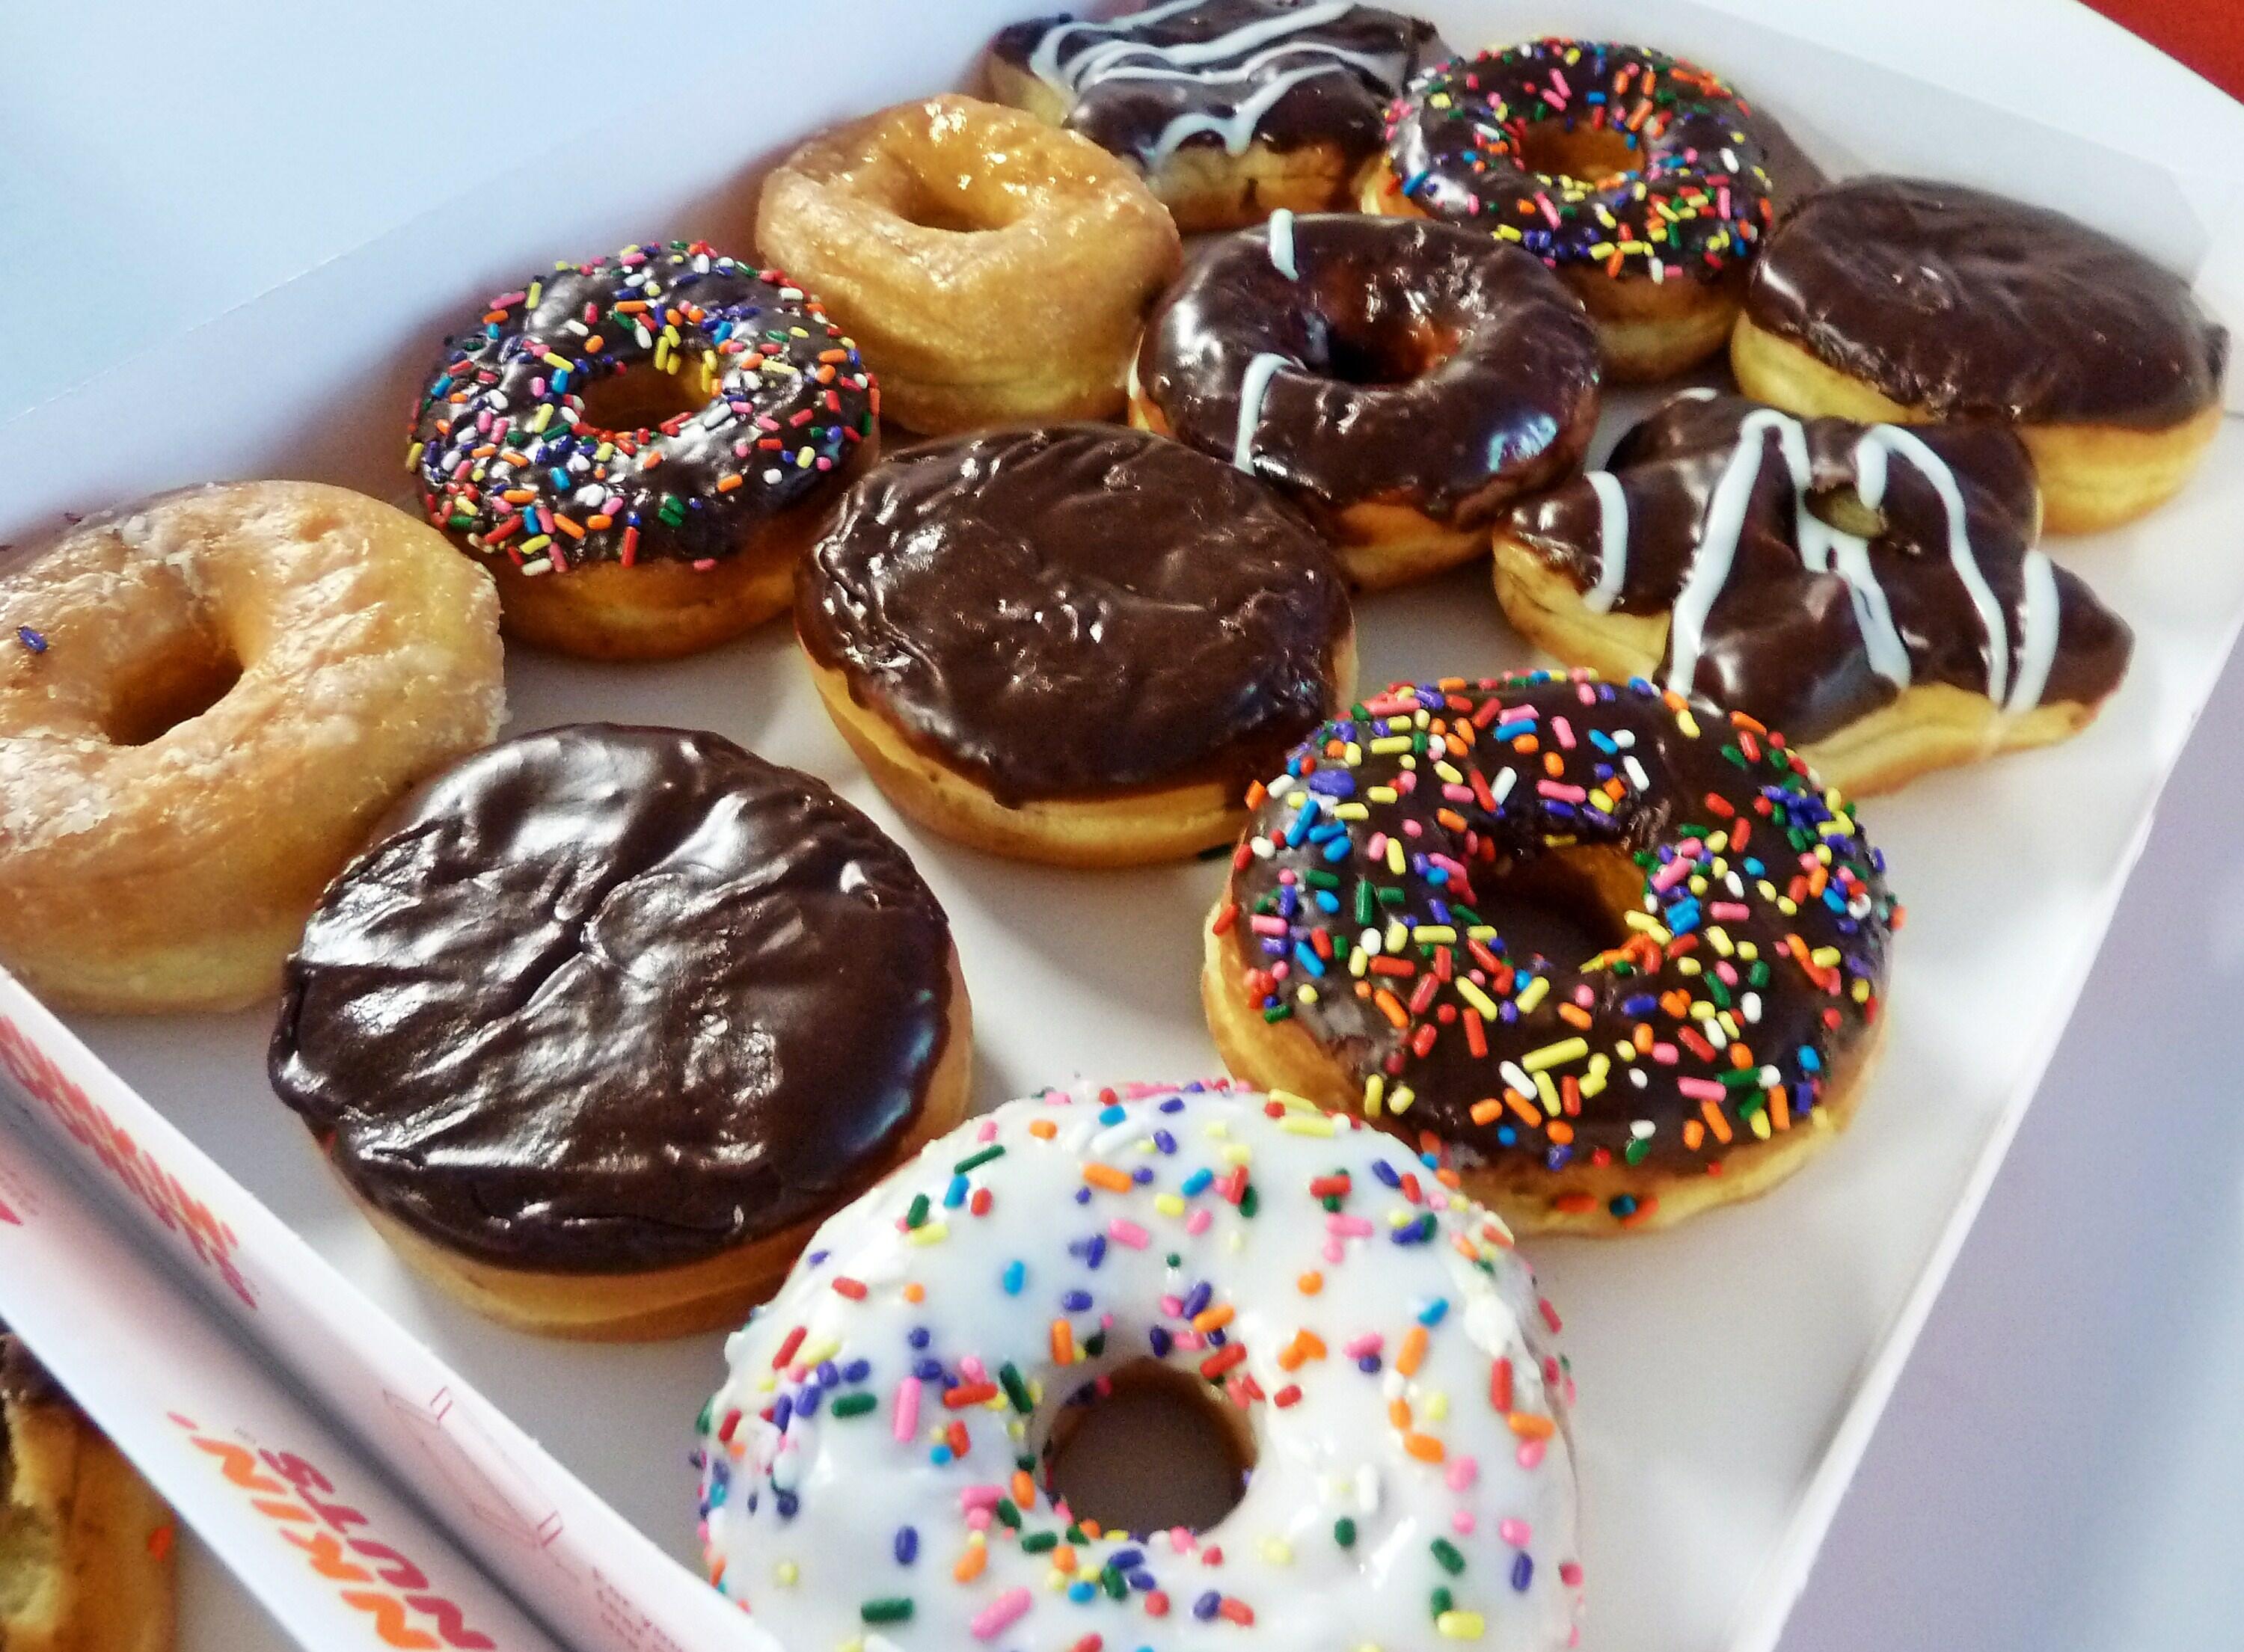 An assortment of ring doughnuts and filled doughnuts, glazed doughnuts and powdered doughnuts is seen in a paper box in Washington, DC June 5, 2015. The first Friday in June is 